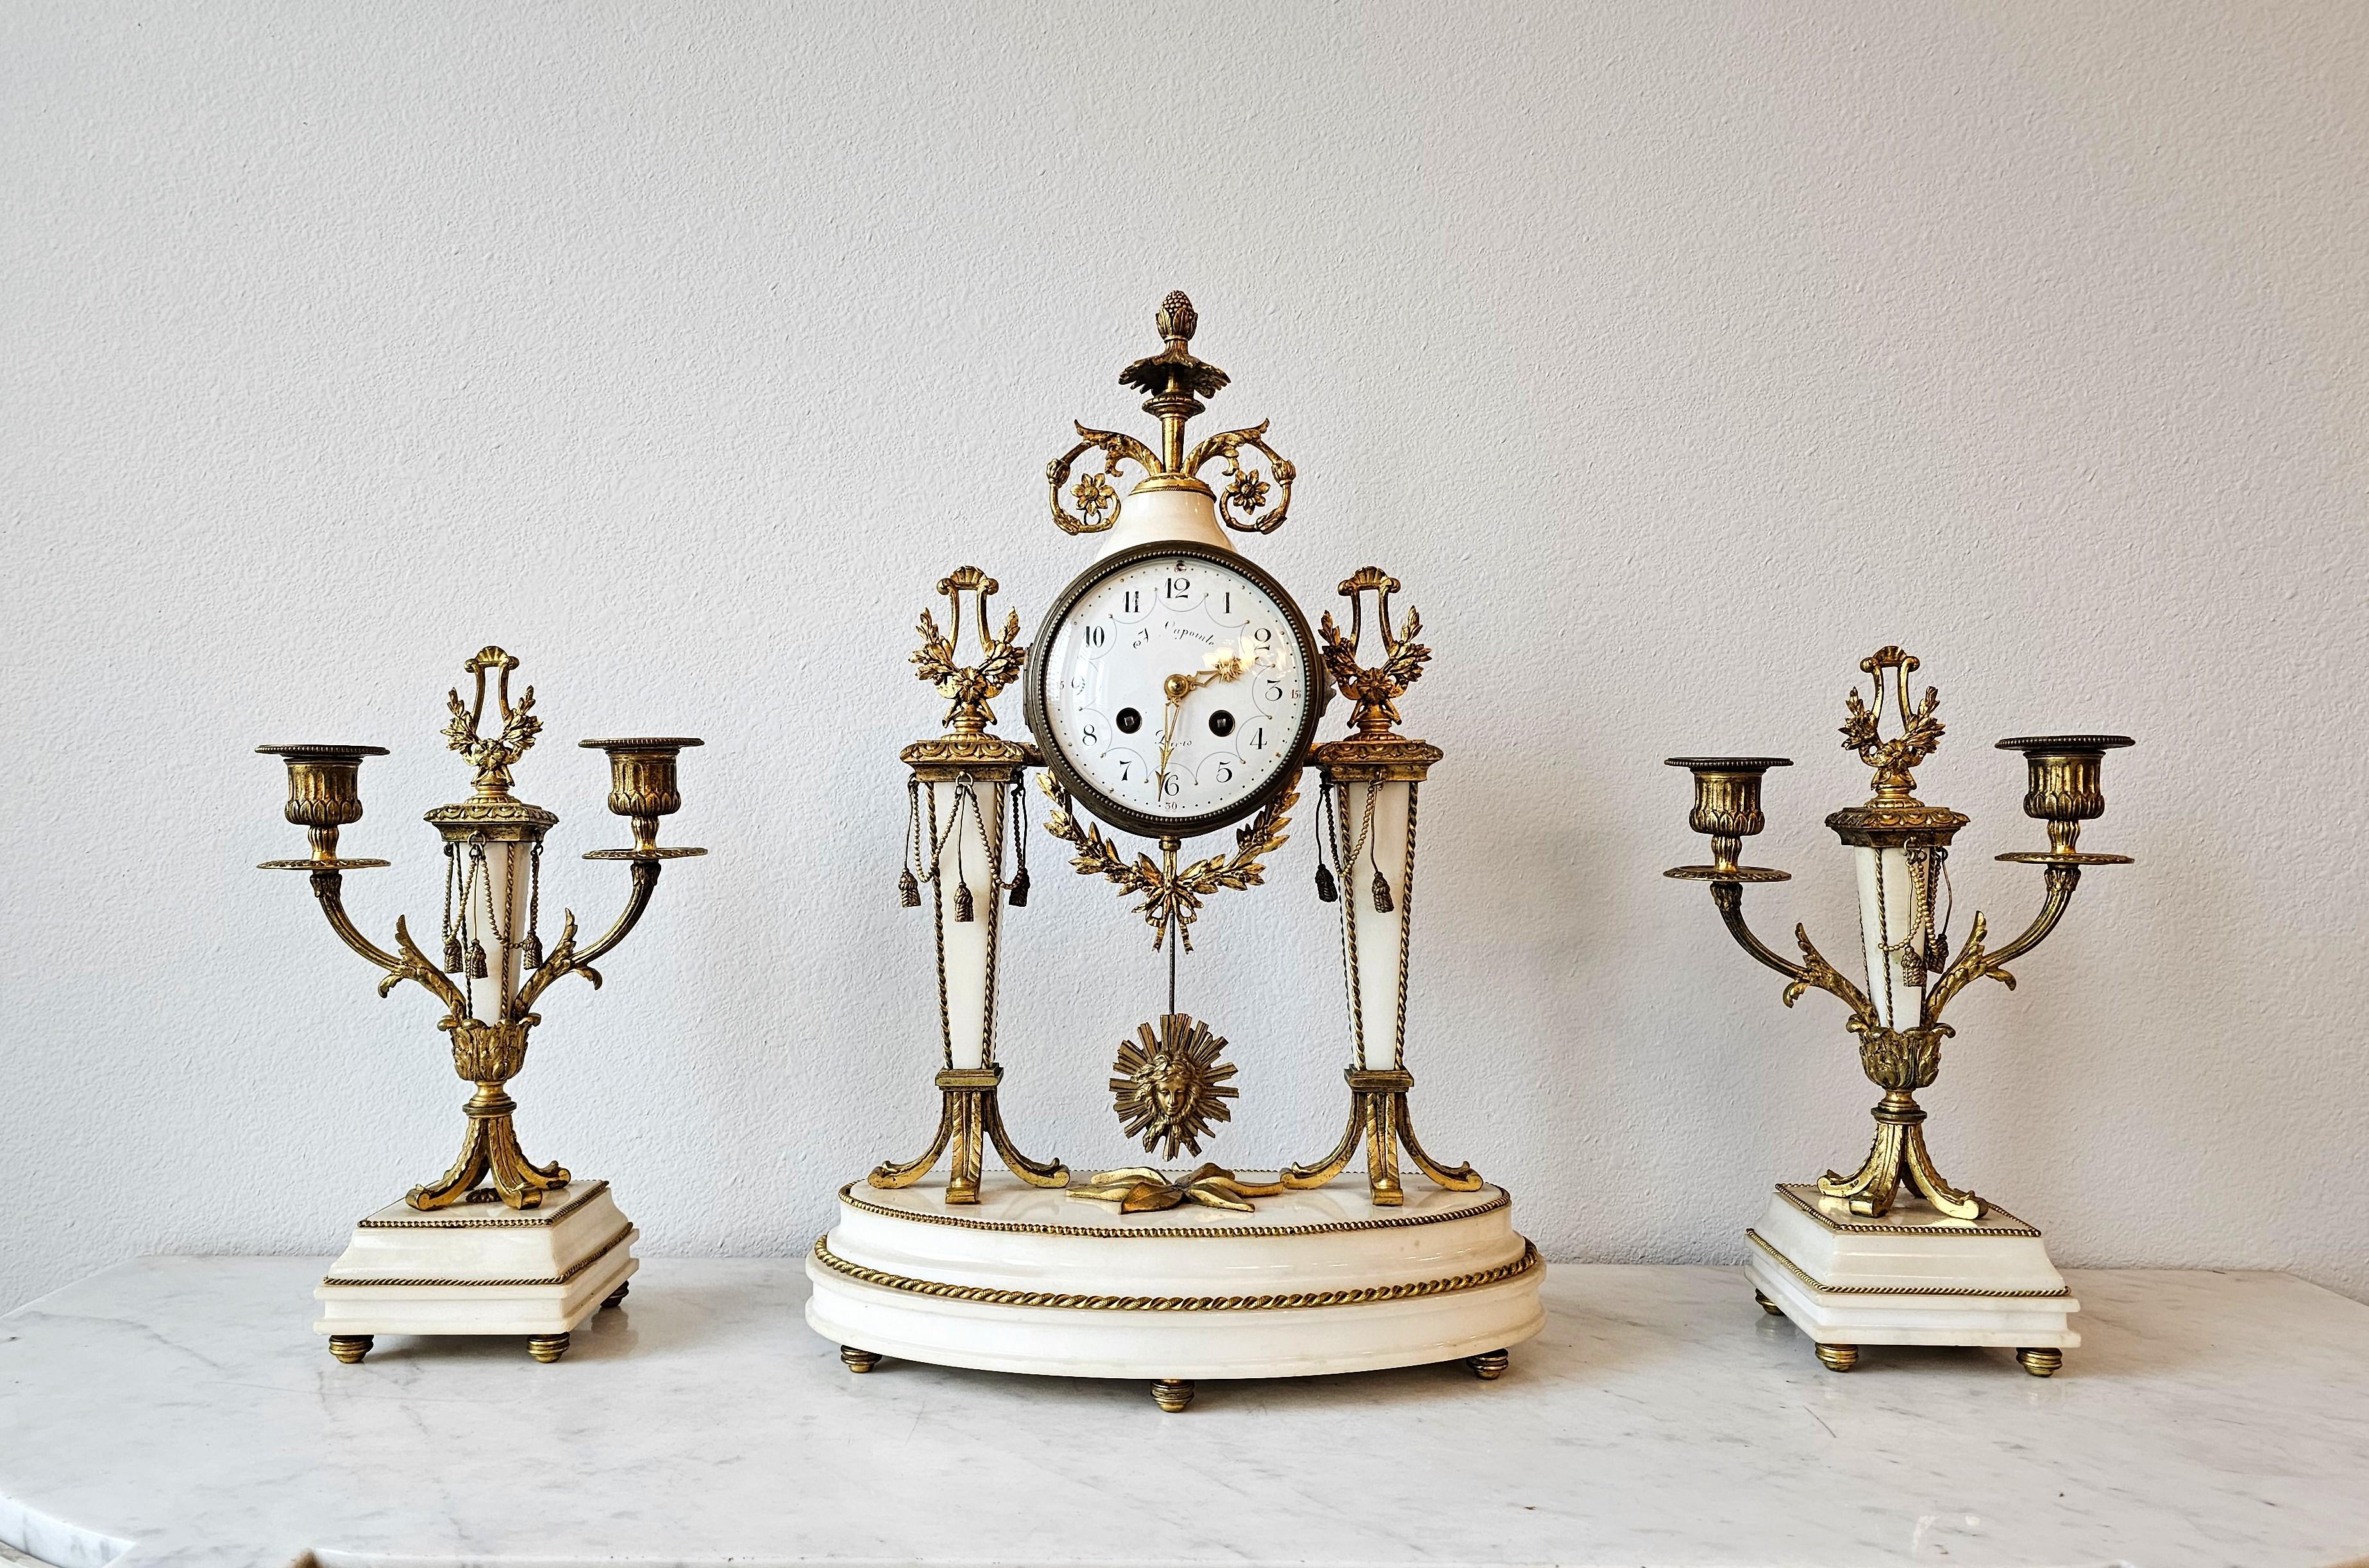 A luxurious French Louis XVI style gilt bronze ormolu and alabaster (onyx-marble) three piece mantle clock and garniture set, possibly attributed to Raingo Freres.

The fine quality antique originating in France in the late 19th century, exquisite